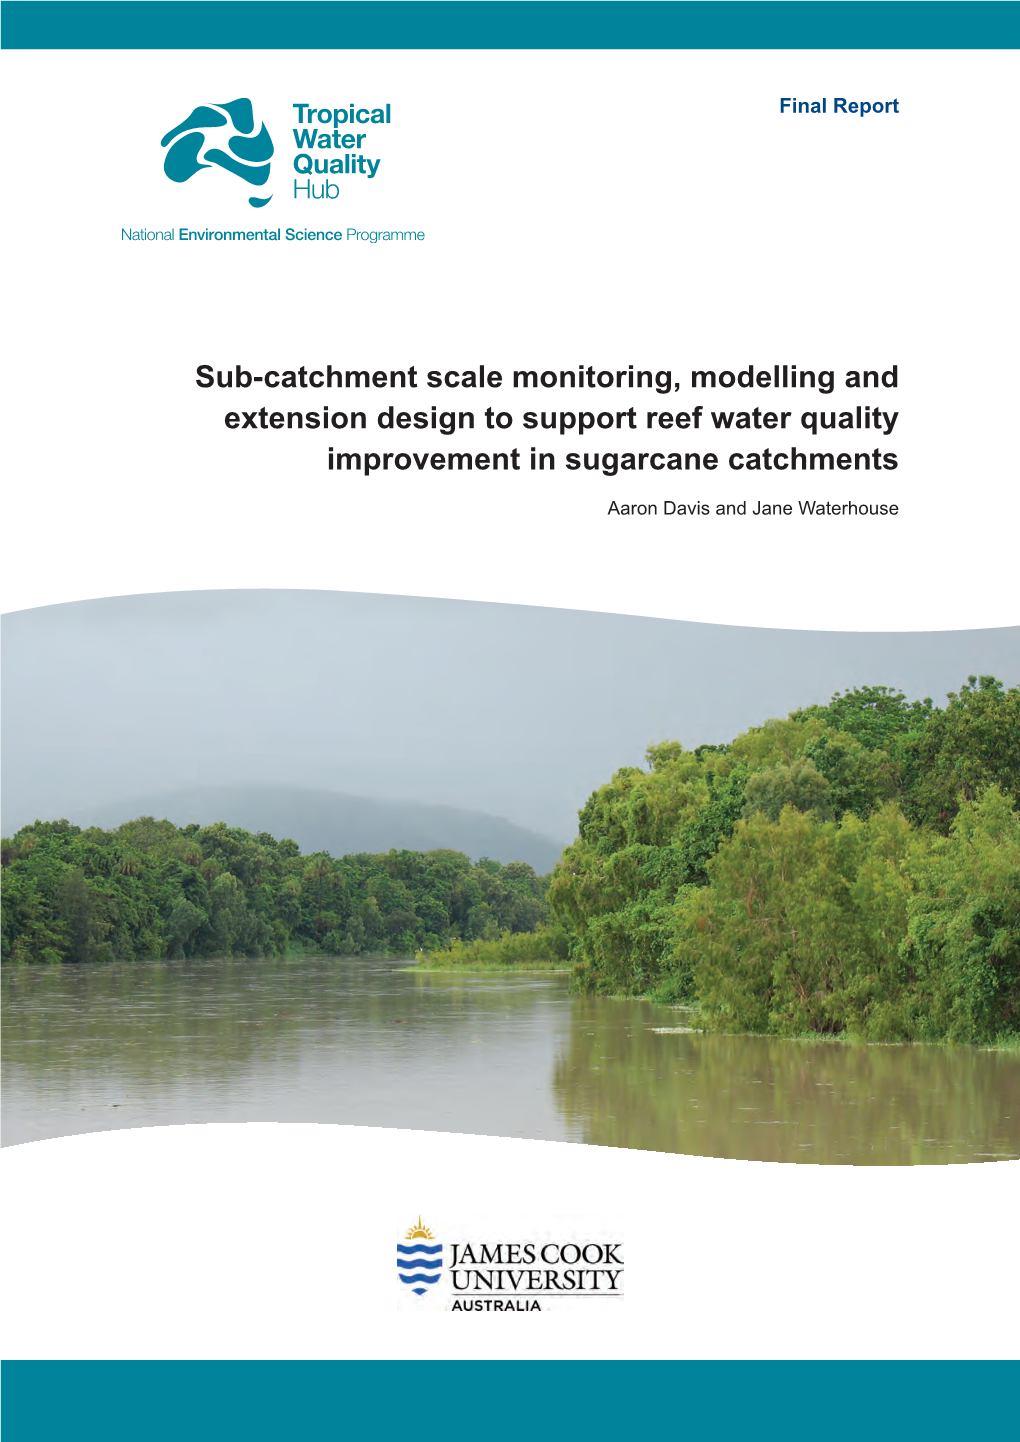 Sub-Catchment Scale Monitoring, Modelling and Extension Design to Support Reef Water Quality Improvement in Sugarcane Catchments